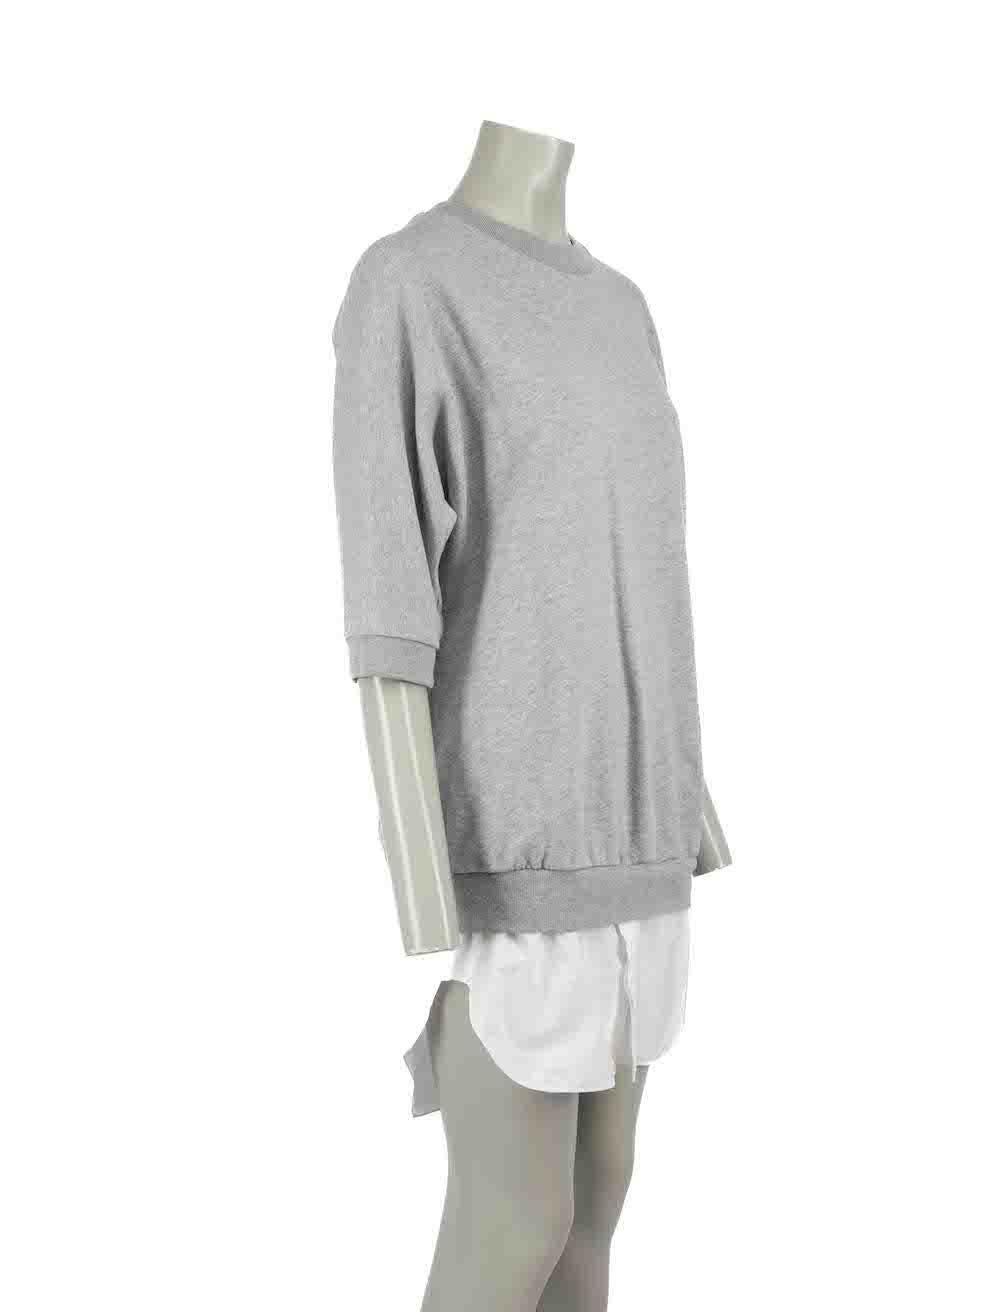 CONDITION is Very good. Minimal wear to jumper is evident. Minimal wear to the front shirt panel and the rear shirt panel lining with light marks on this used 3.1 Phillip Lim designer resale item.
 
Details
Grey
Cotton
Mid sleeves jumper
Oversized